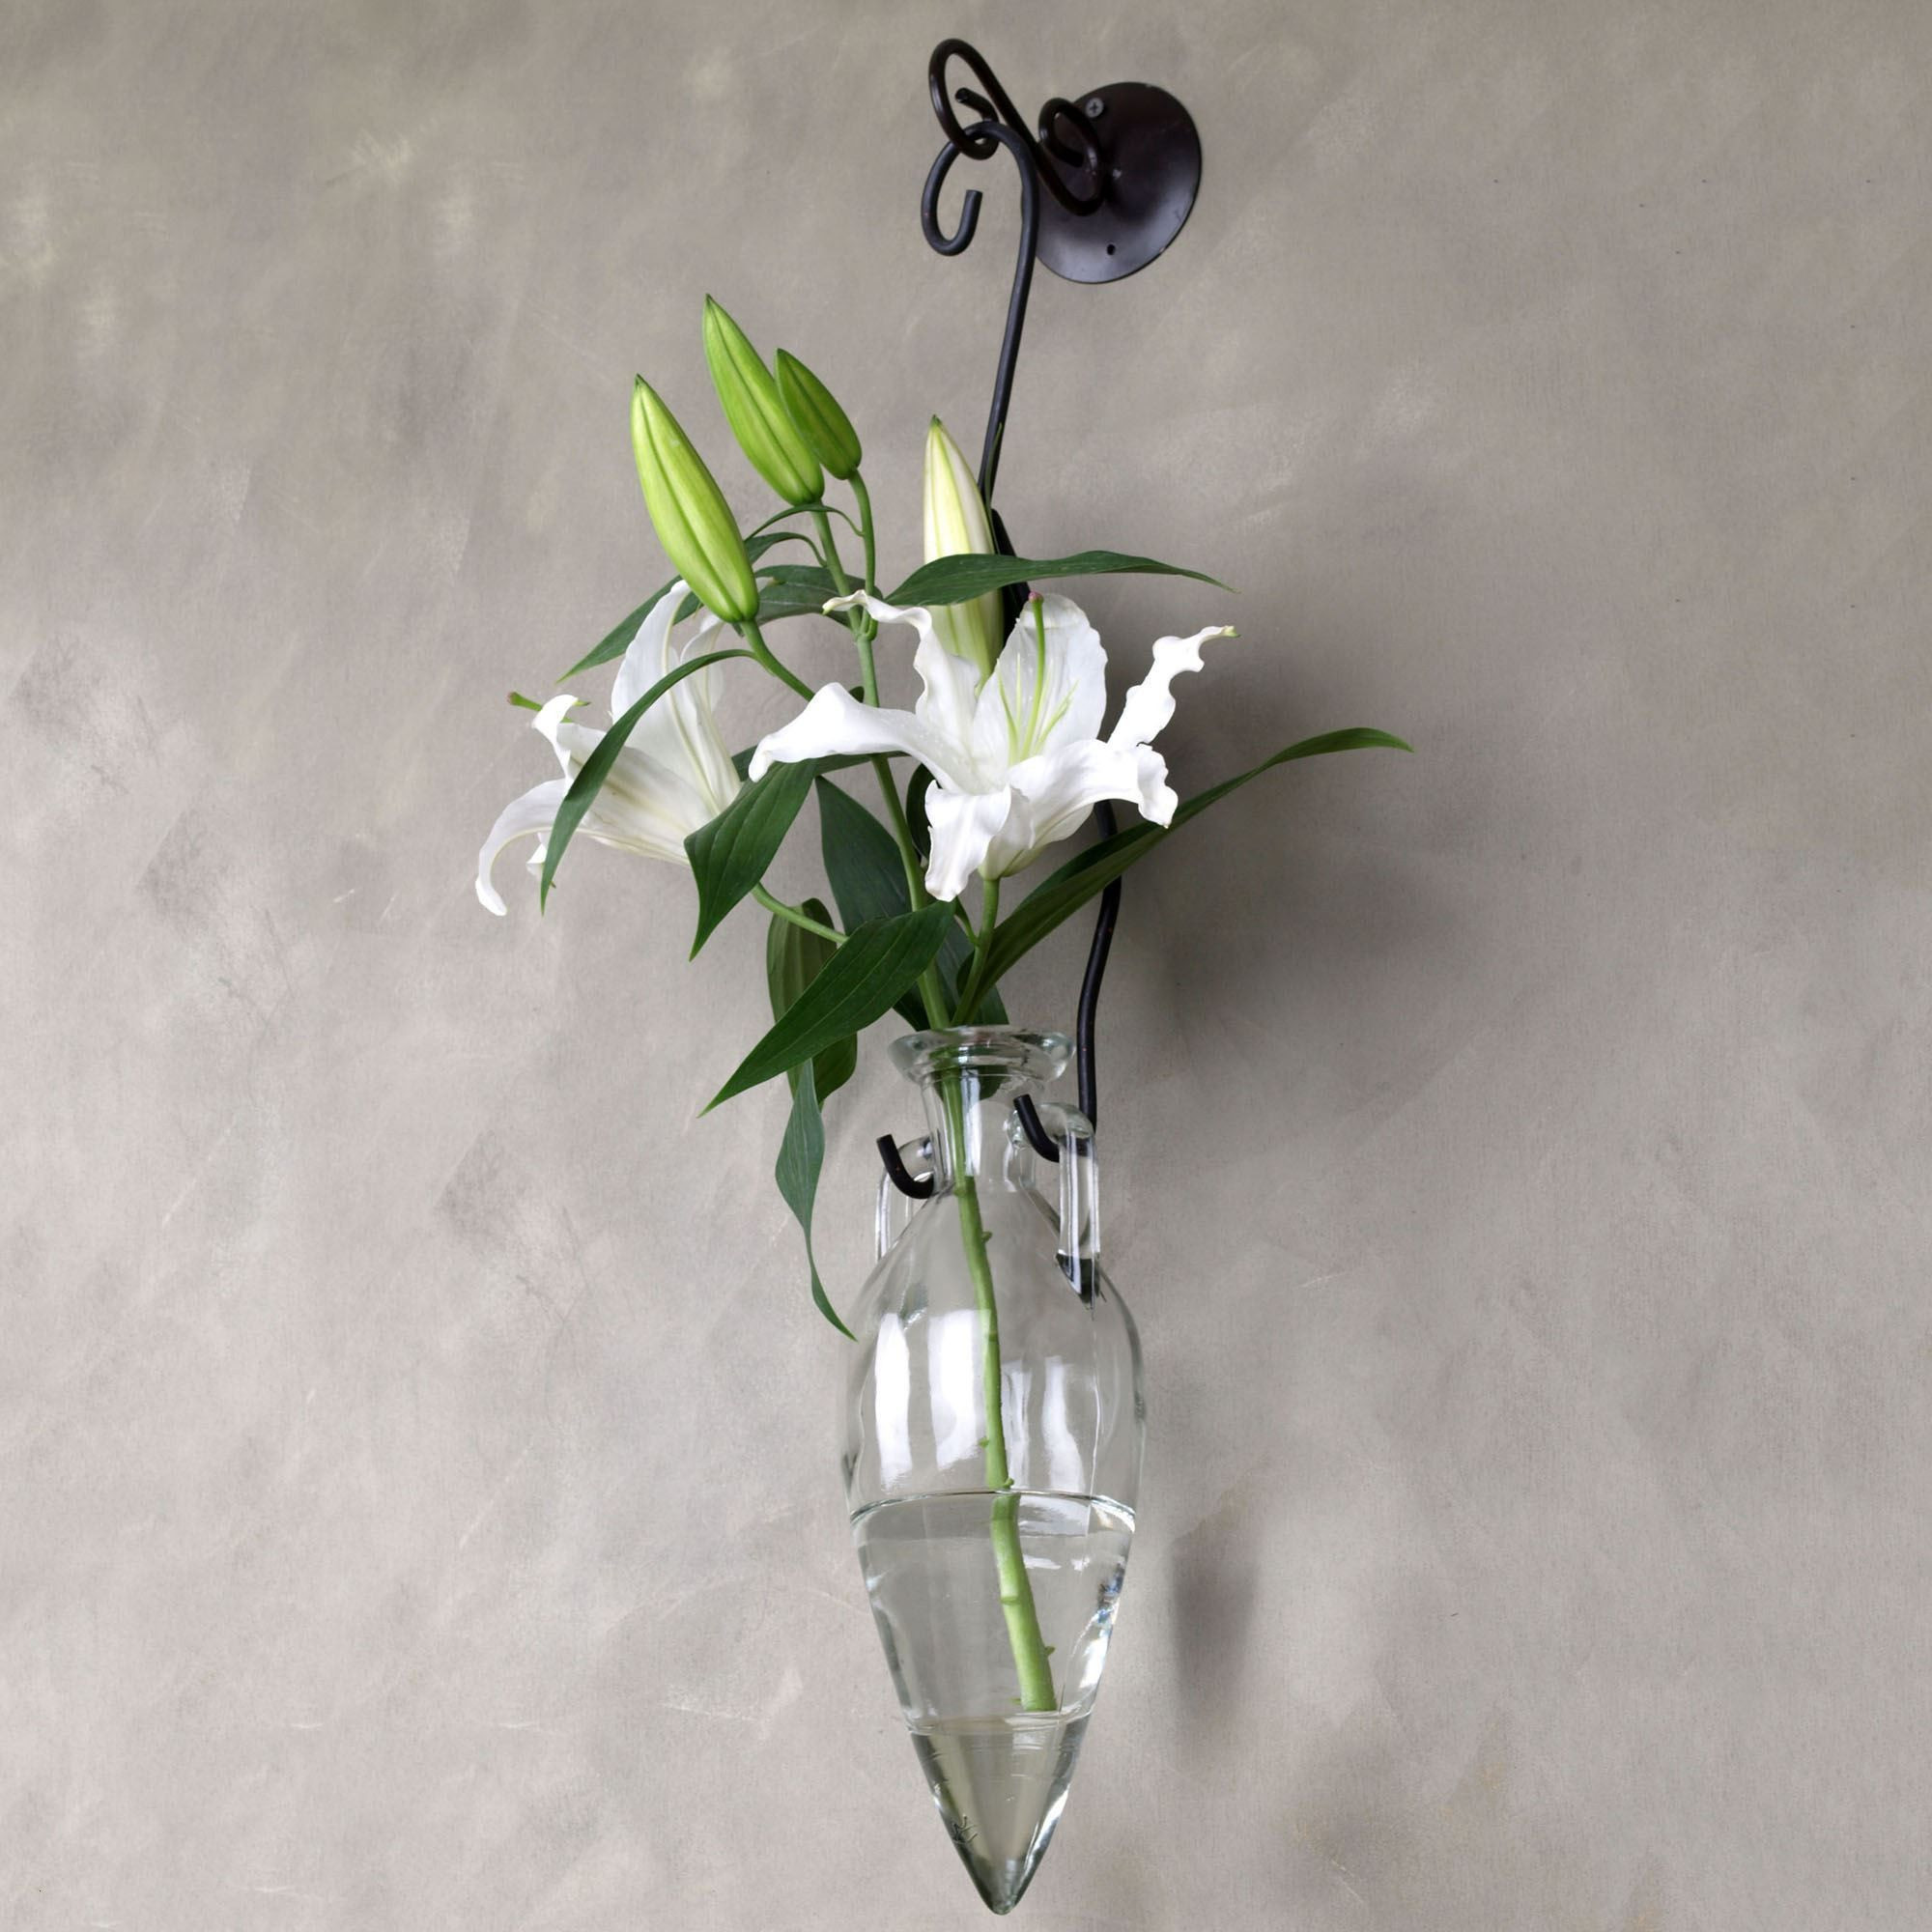 30 Fabulous Rosenthal White Vase 2024 free download rosenthal white vase of 18 mid century glass vase the weekly world with regard to wall vase decor il fullxfull l7e9h vases wall flower vase